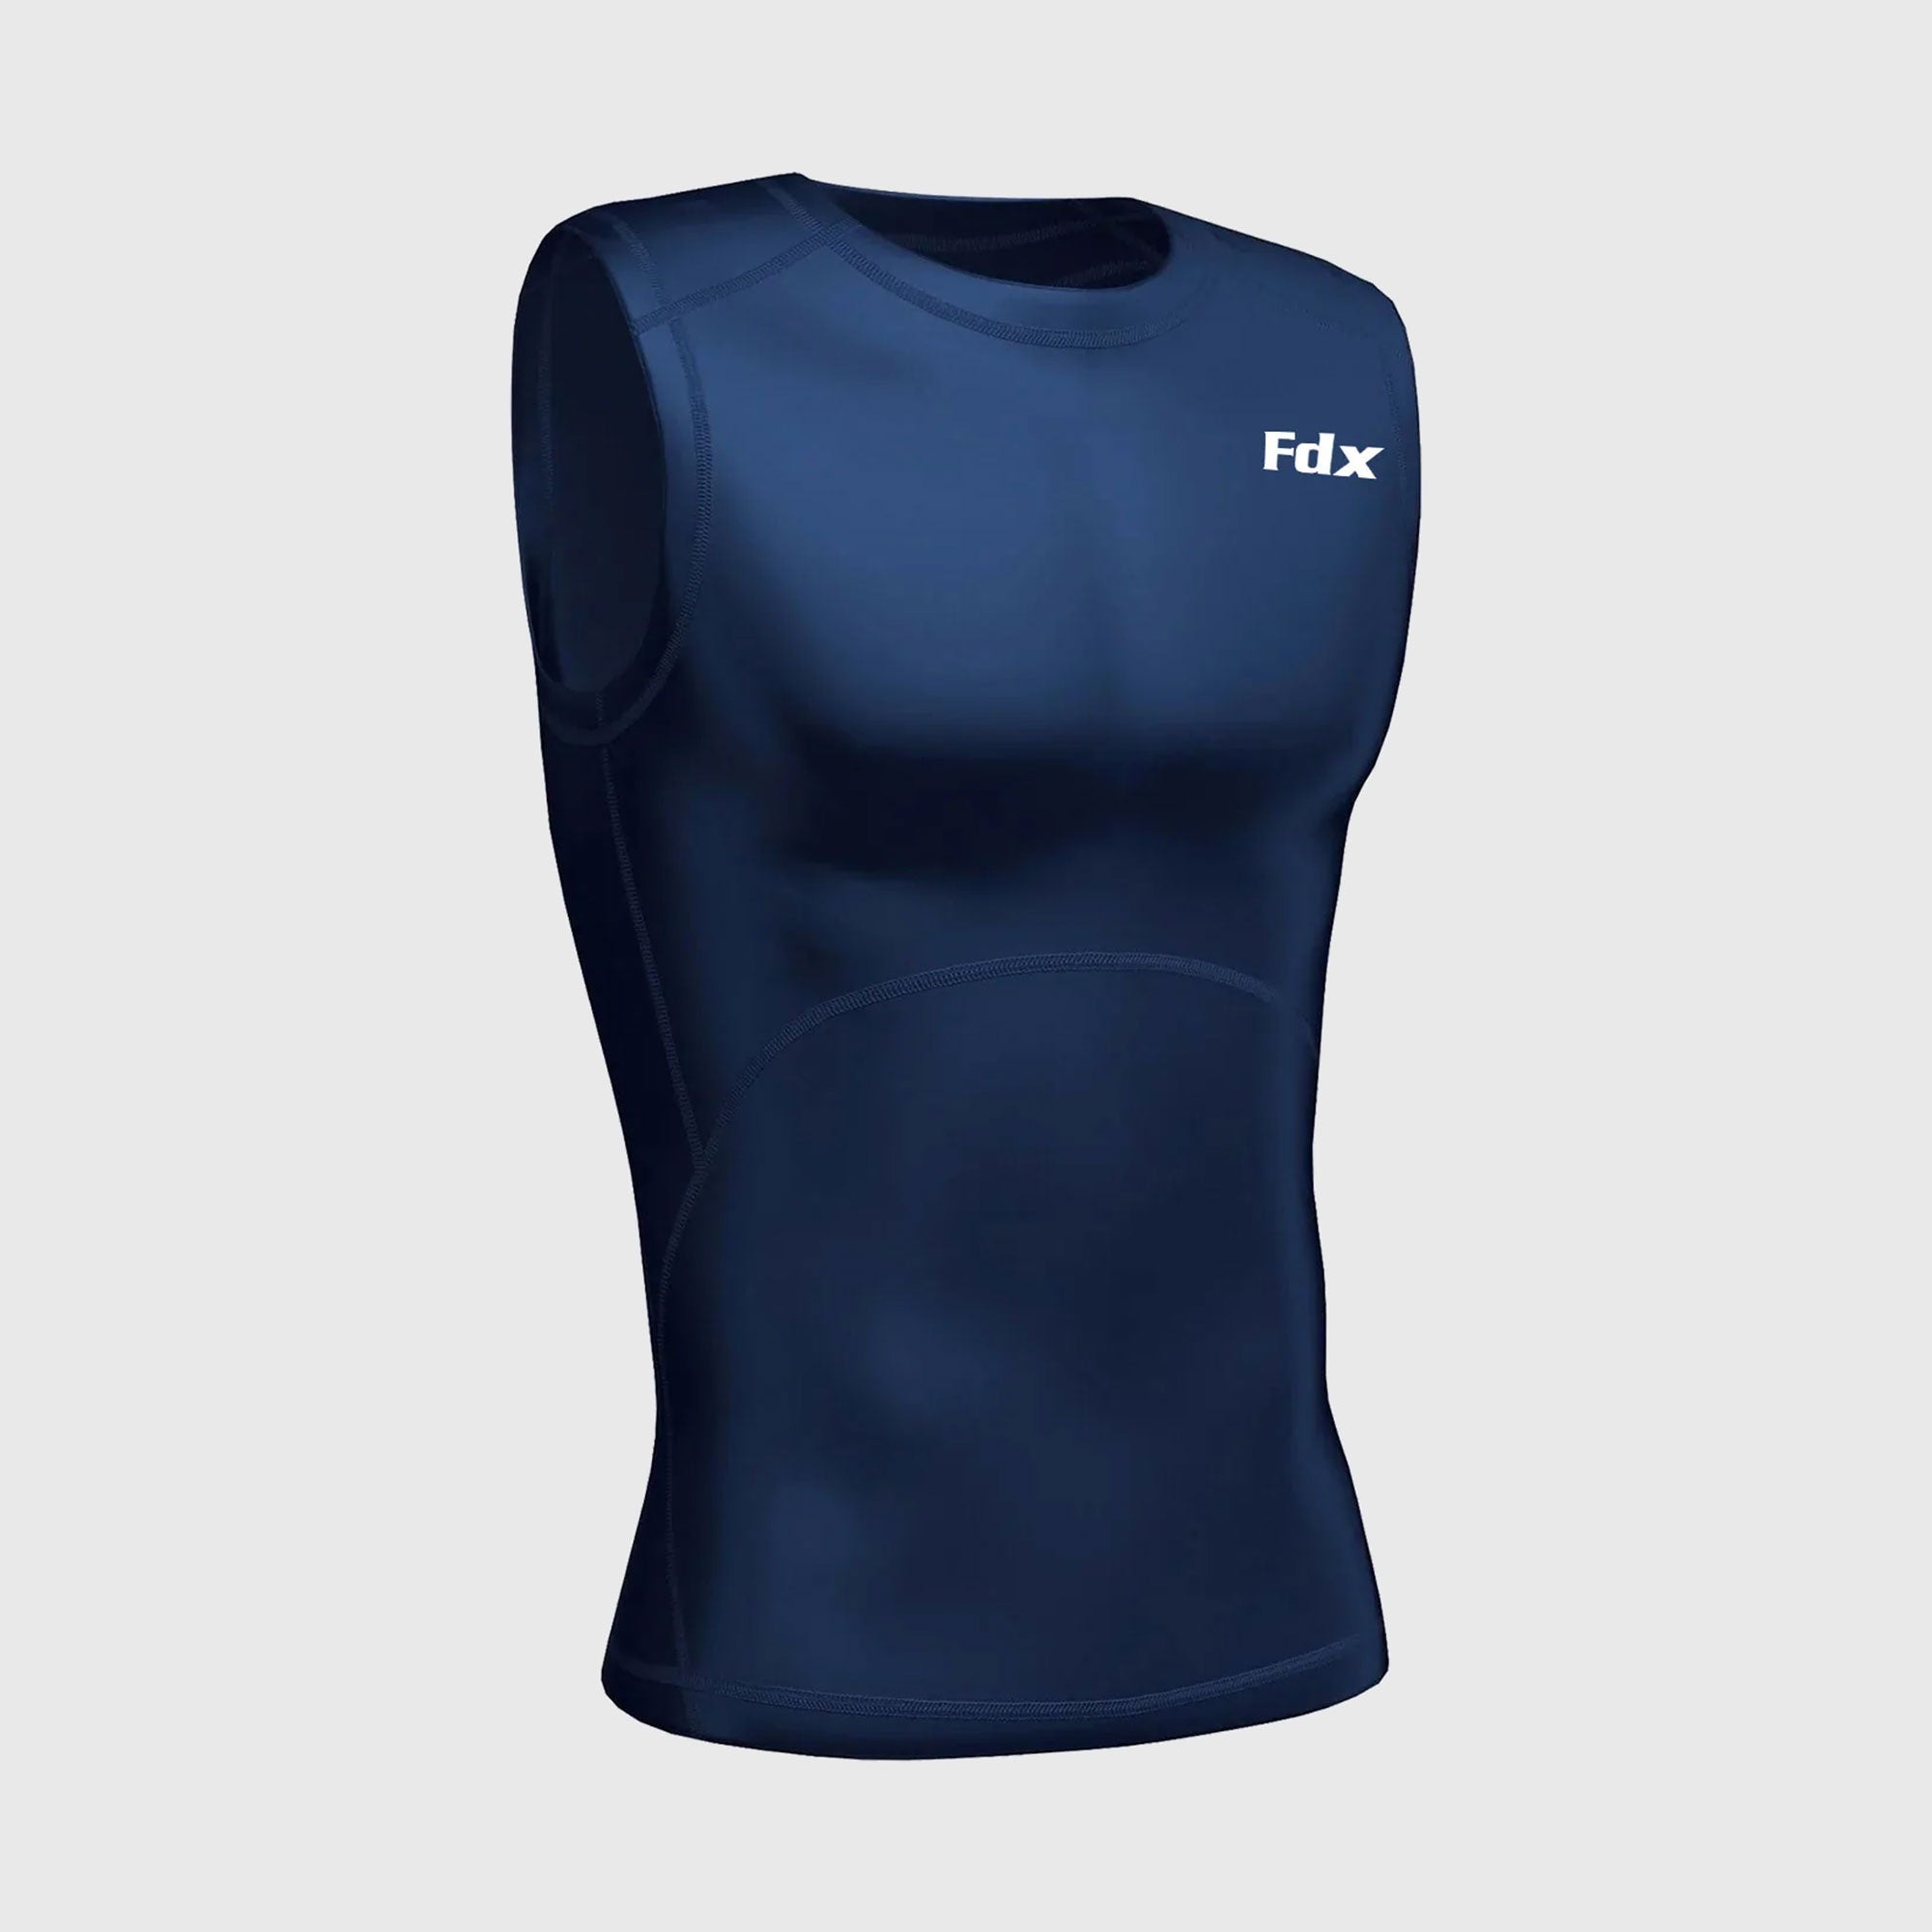 Fdx Compression Sleeveless Top for Men's Navy Blue Running Gym Workout Wear Rash Guard Stretchable Breathable - Aeroform